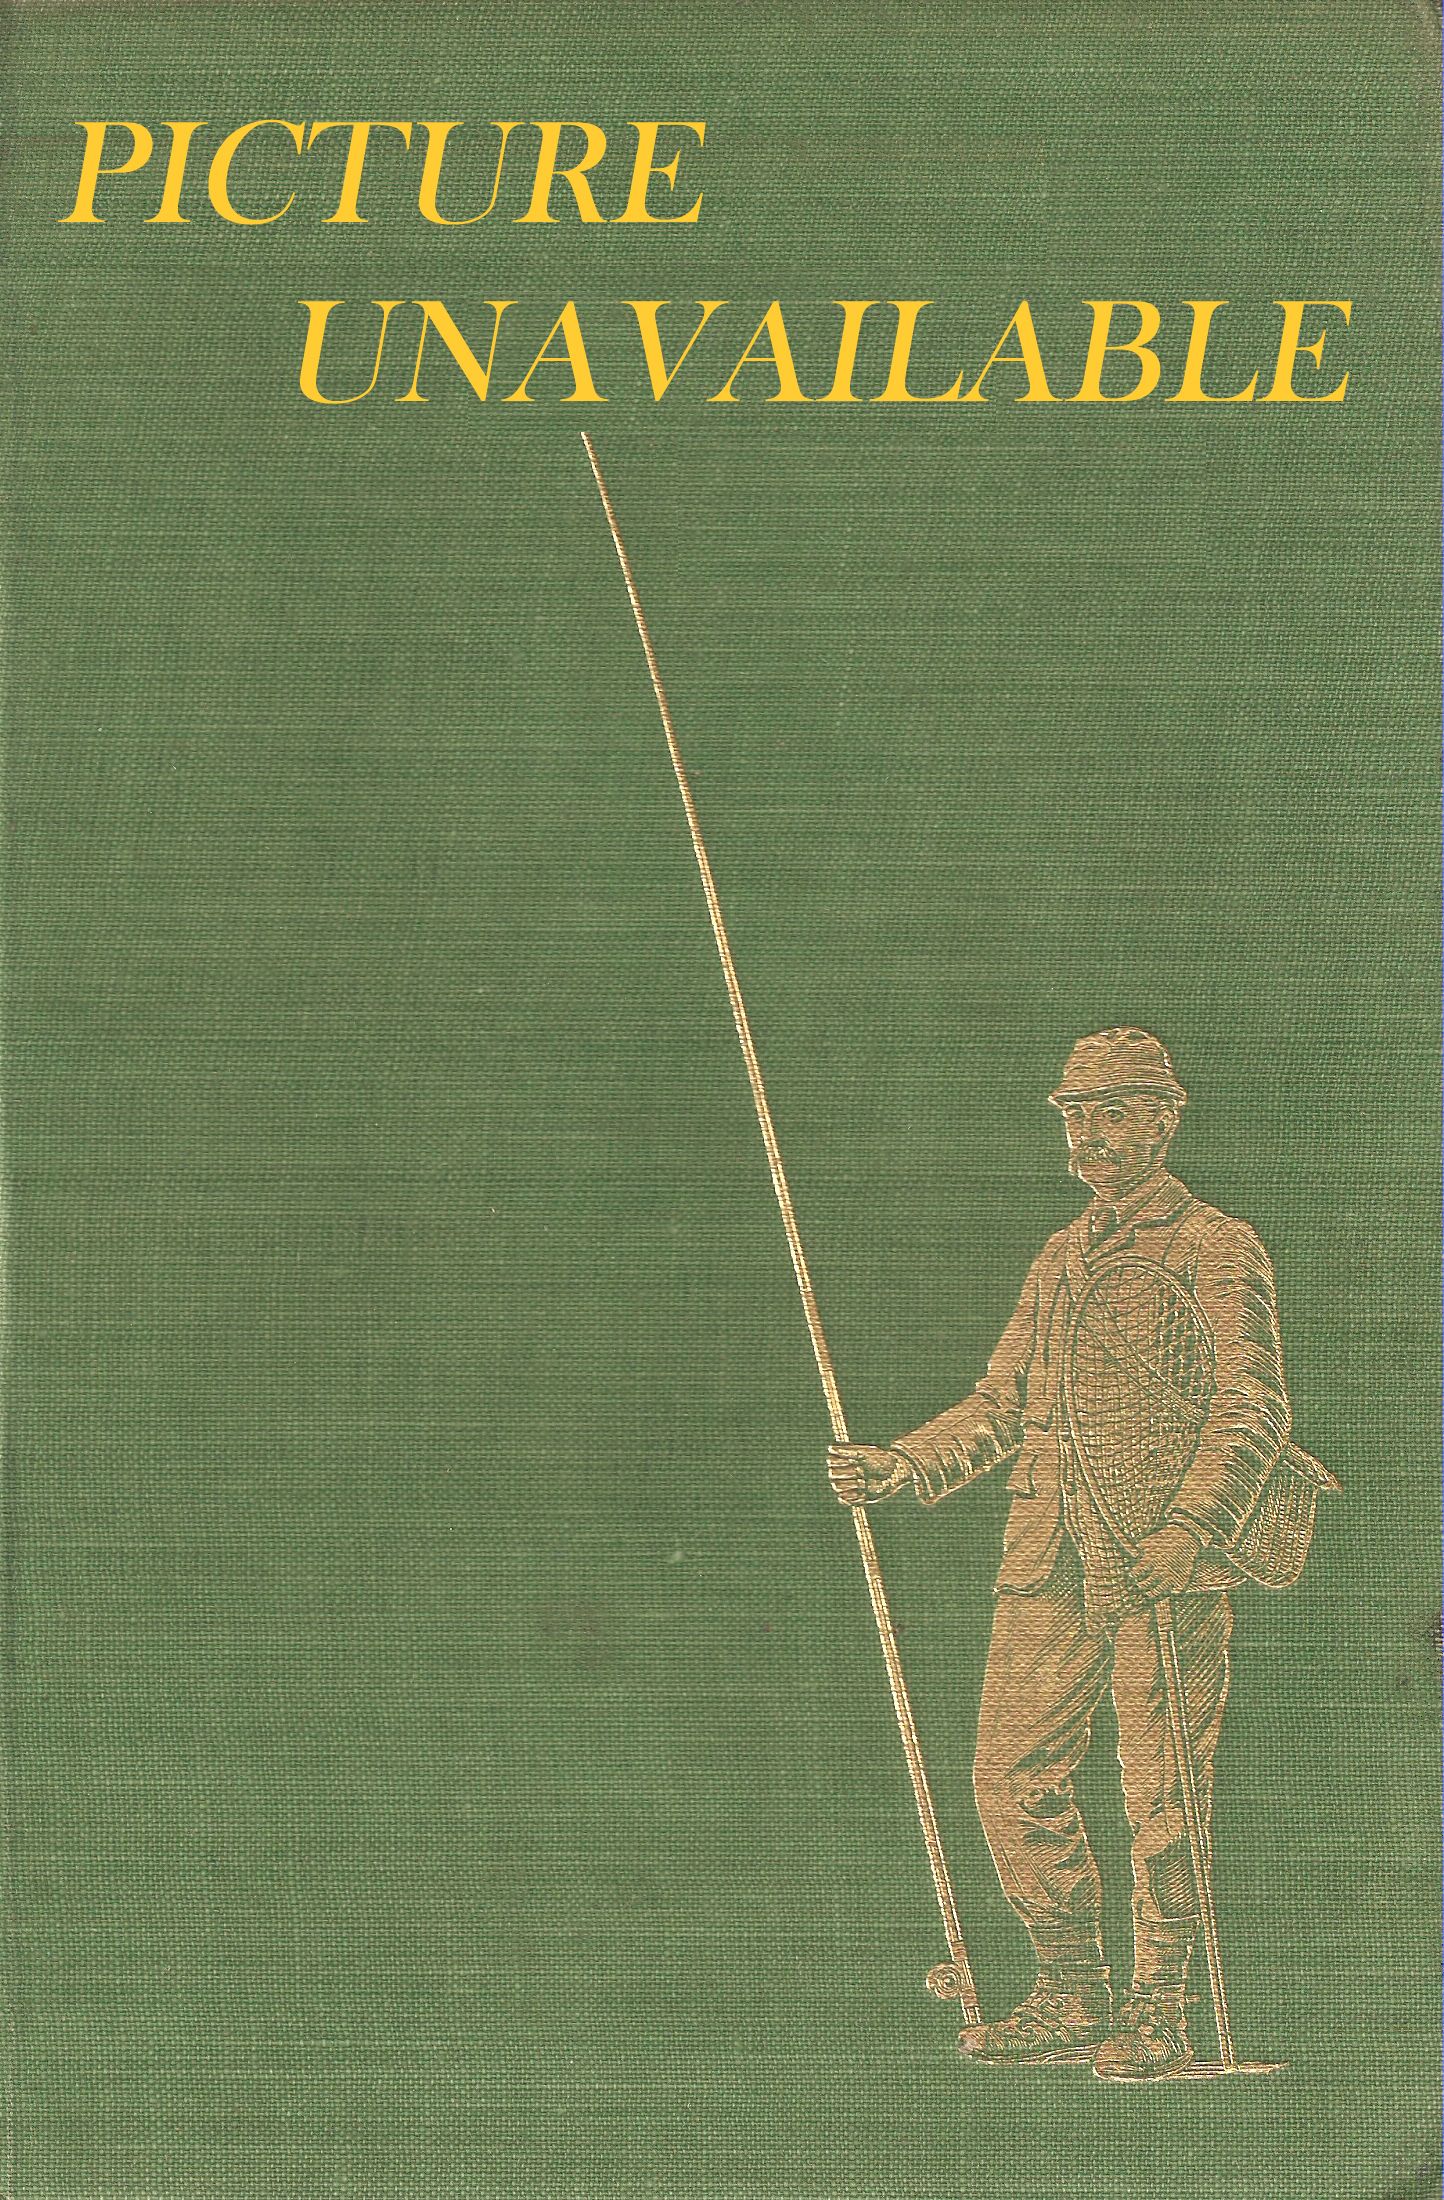 BLACKWELL'S LEARNING LIBRARY No. 41: FRESHWATER FISHING. By A.R.C. Peter.